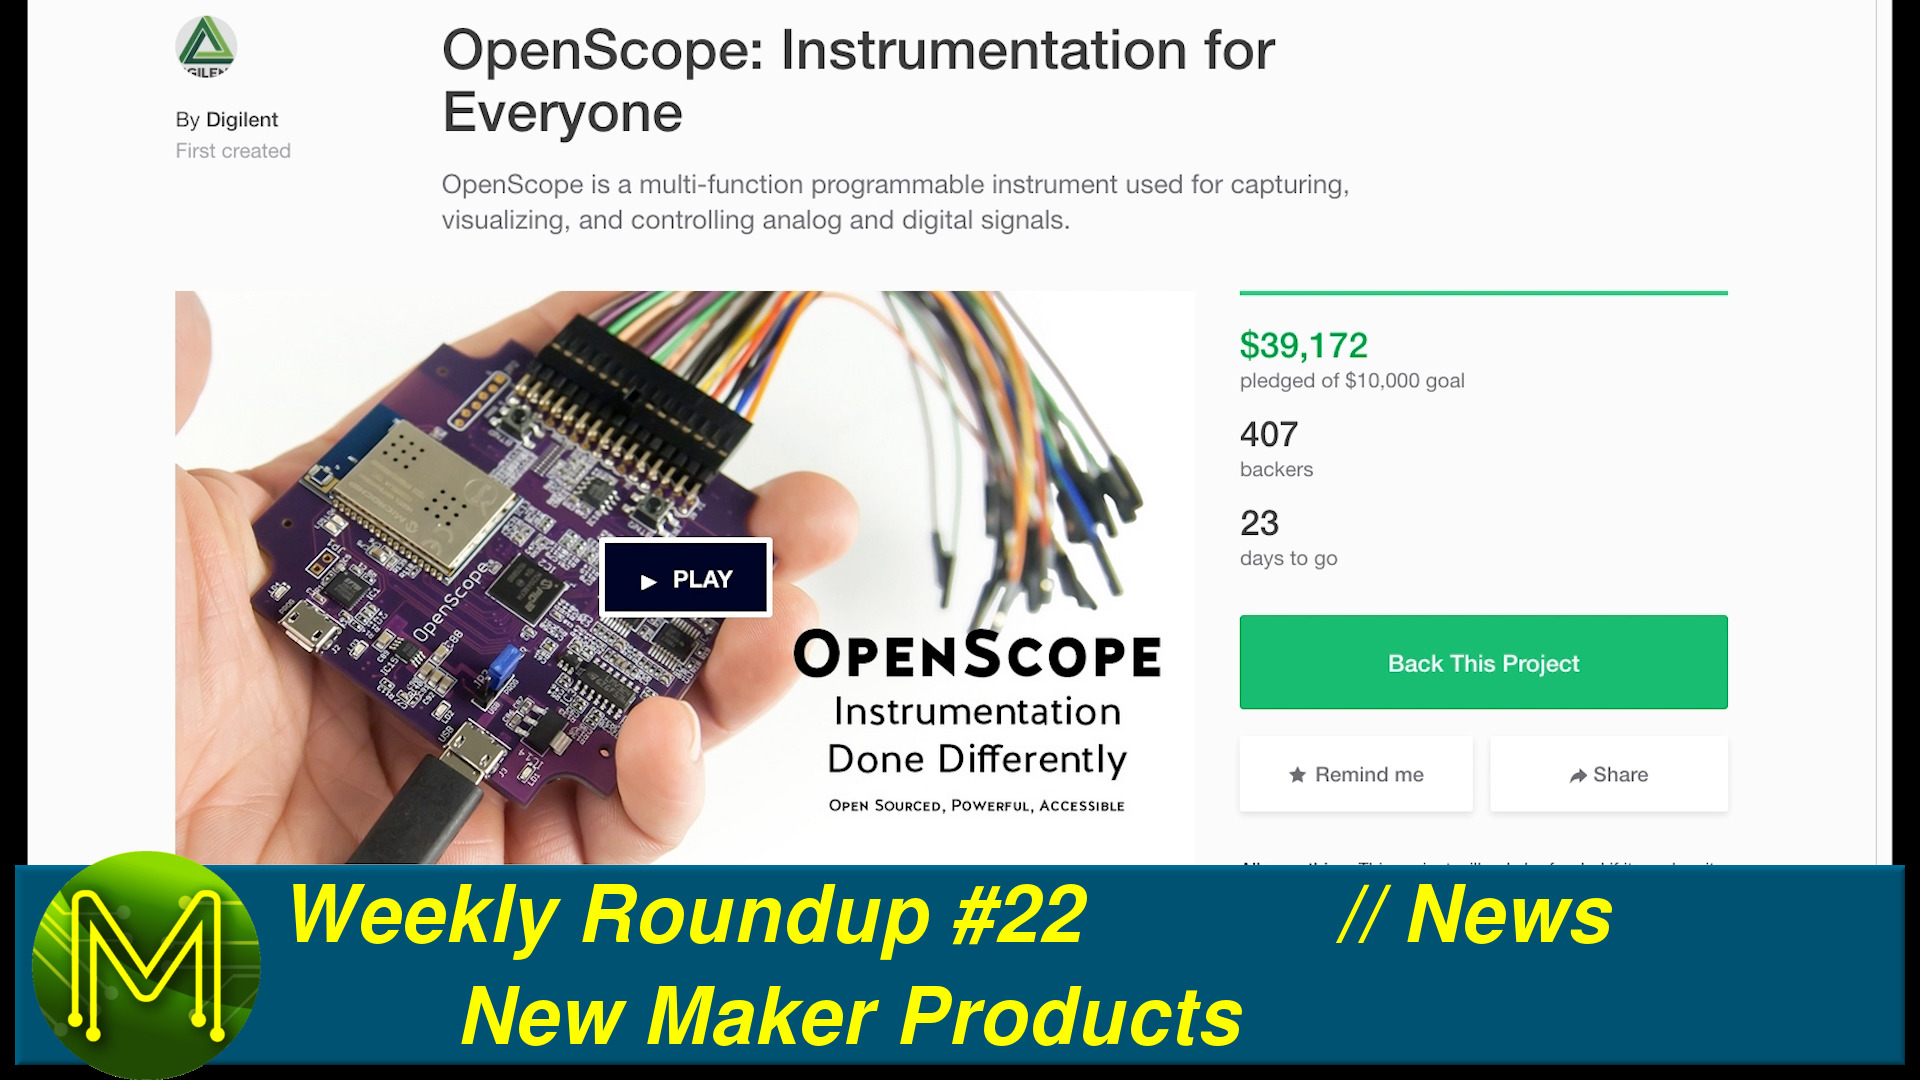 Weekly Roundup #22 - New Maker Products // News